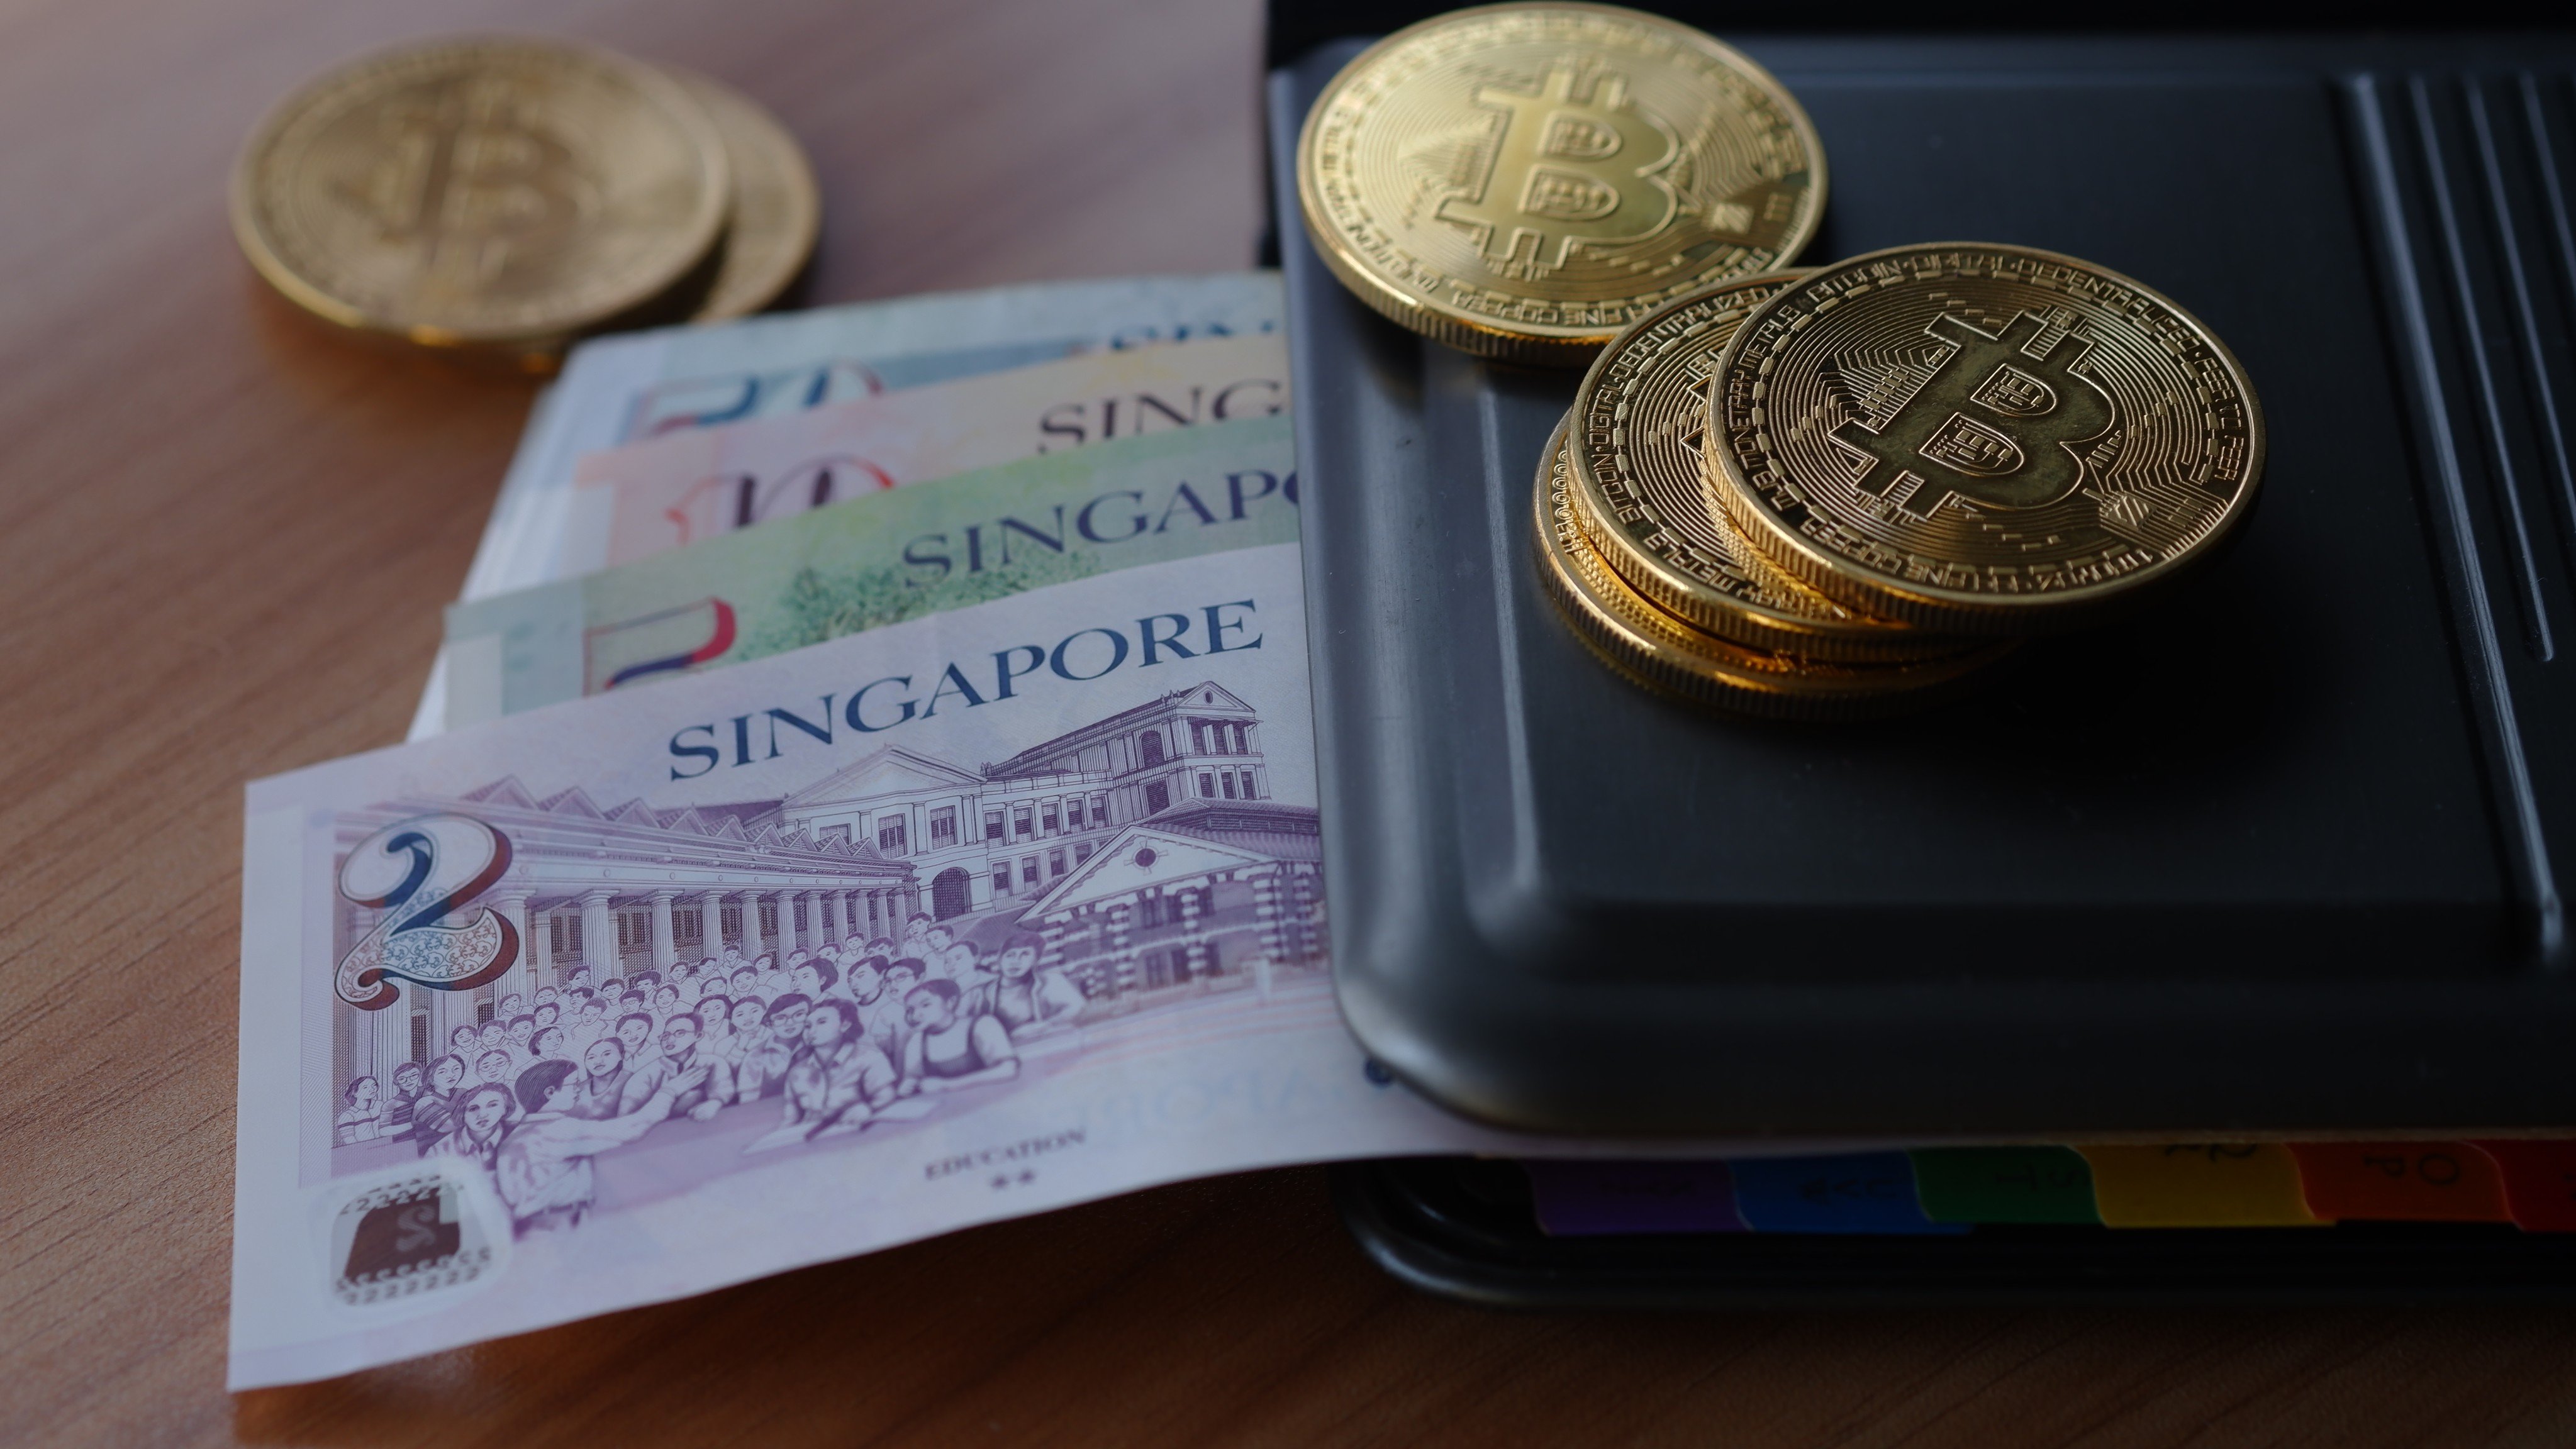 Singapore has hatched a fast-moving fintech vision that’s paying off fast, even in bitcoin. Photo: Shutterstock